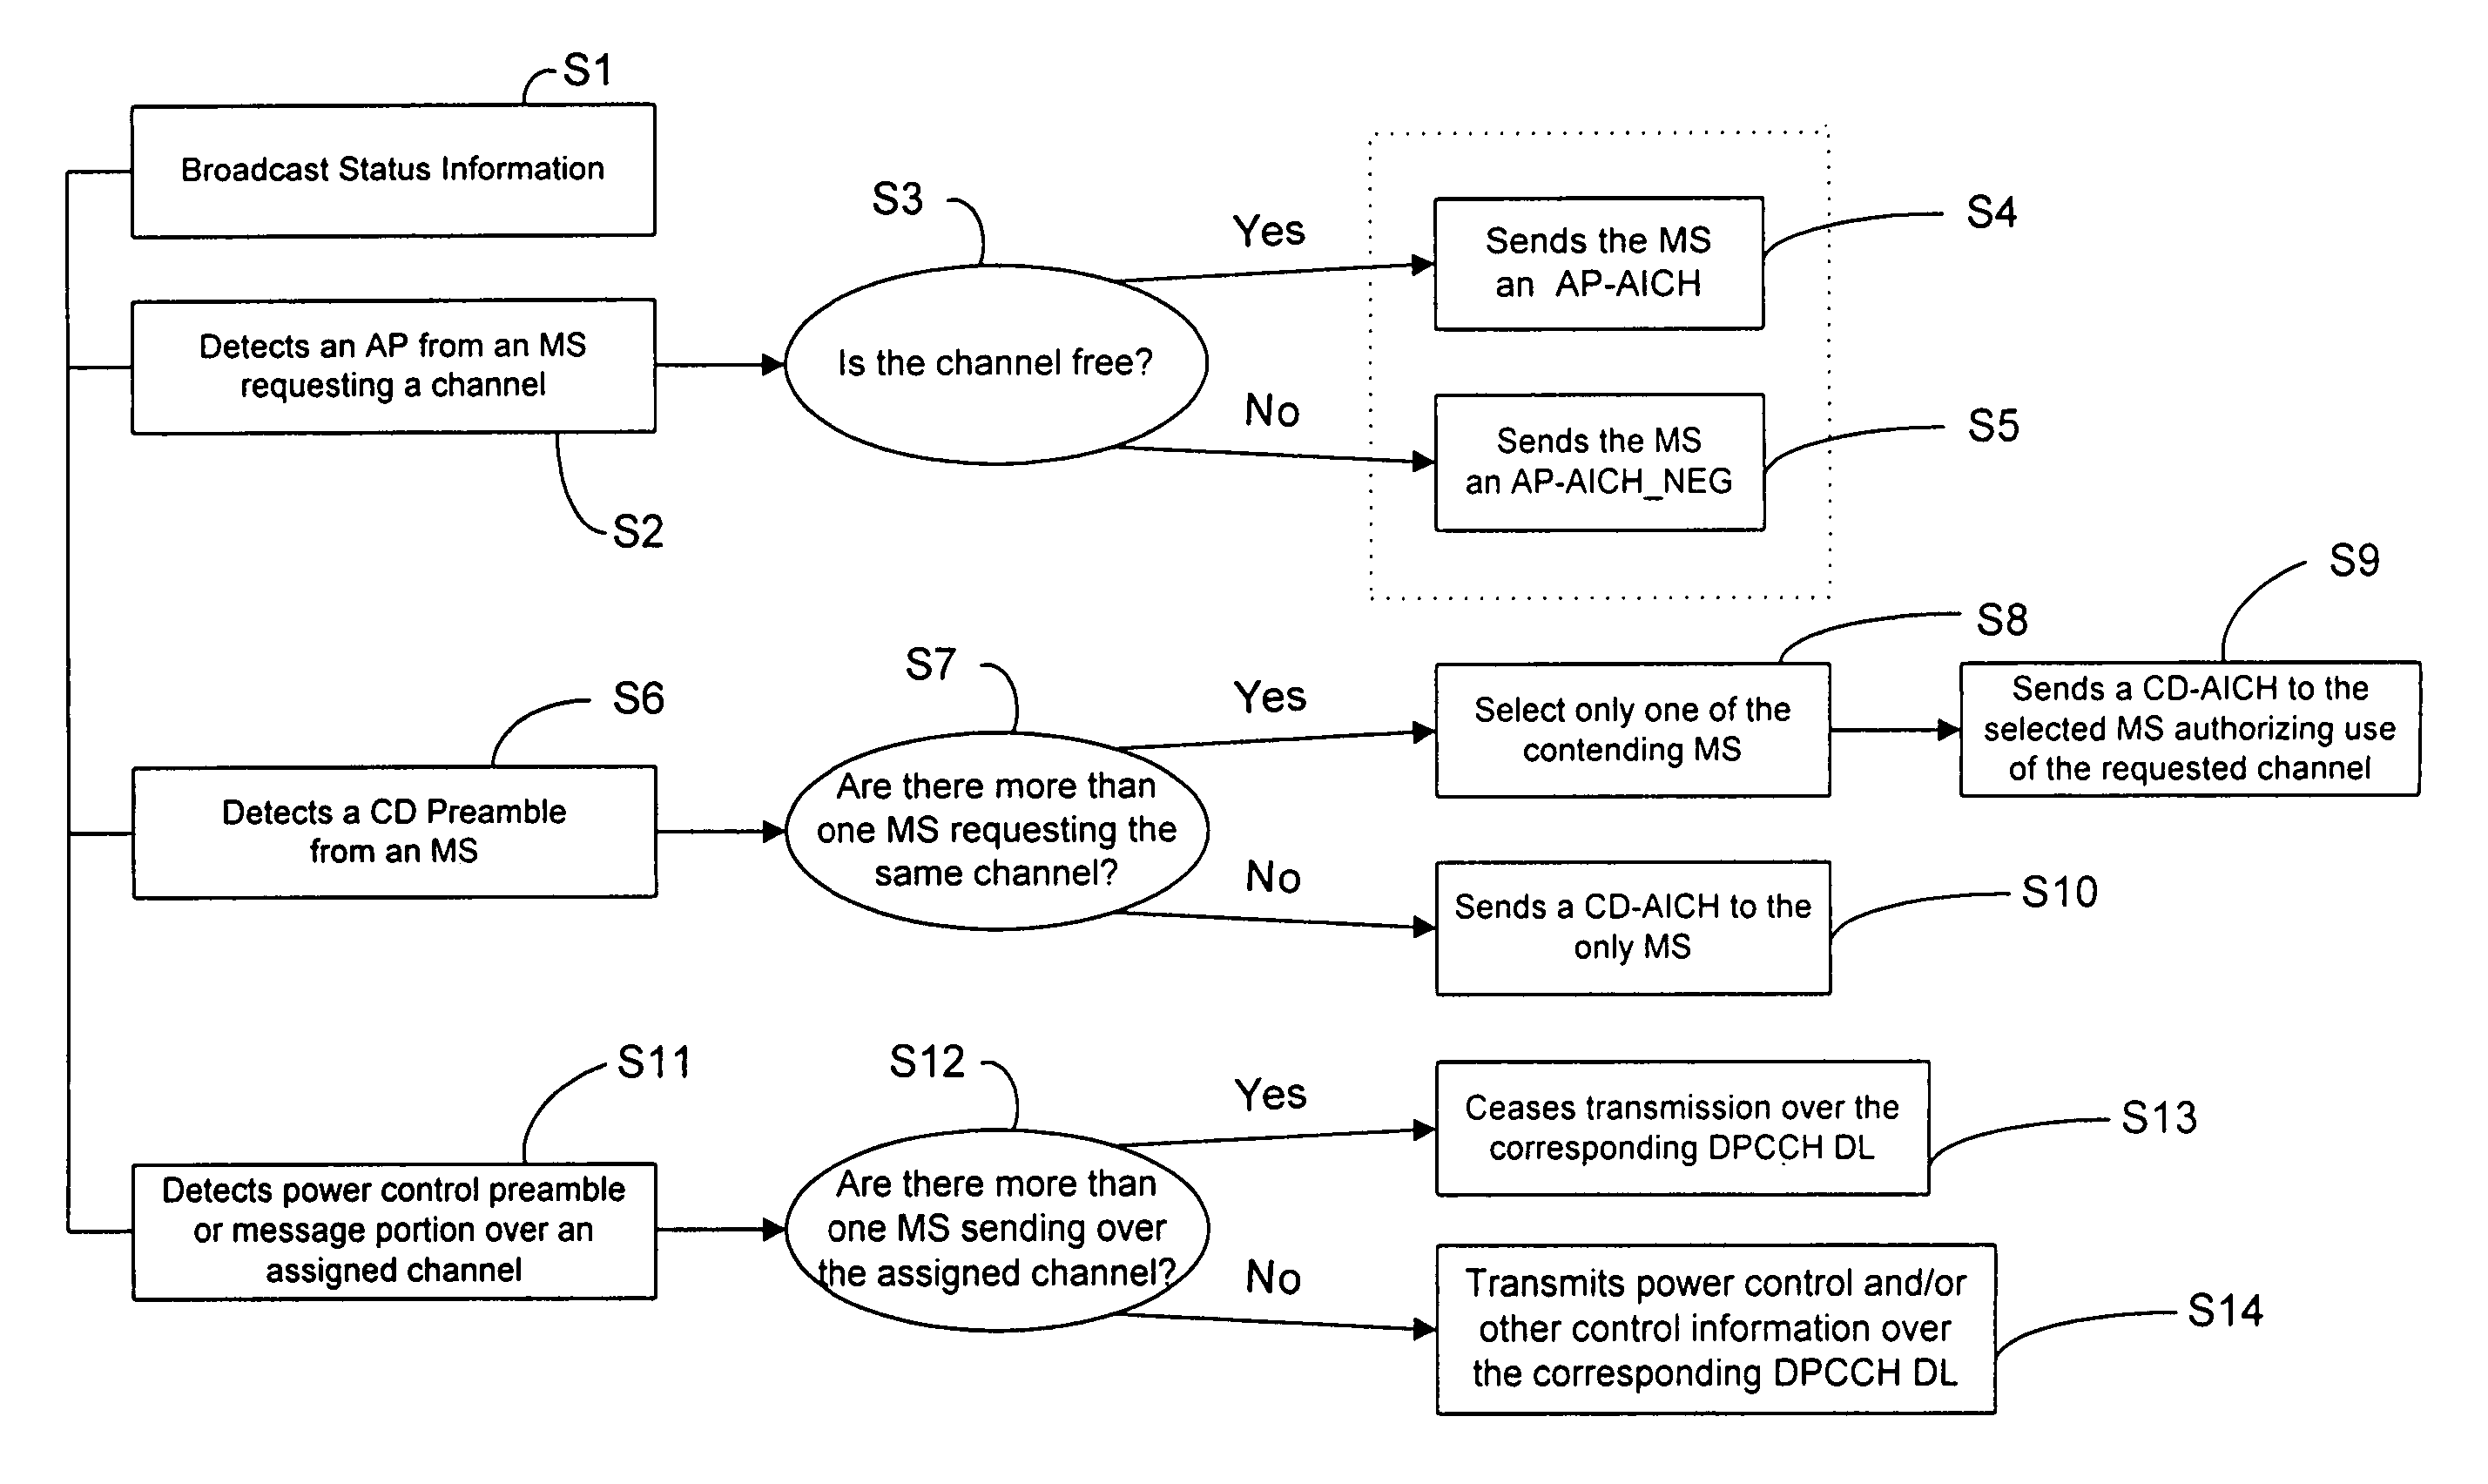 Hybrid DSMA/CDMA (digital sense multiple access/code division multiple access) method with collision resolution for packet communications